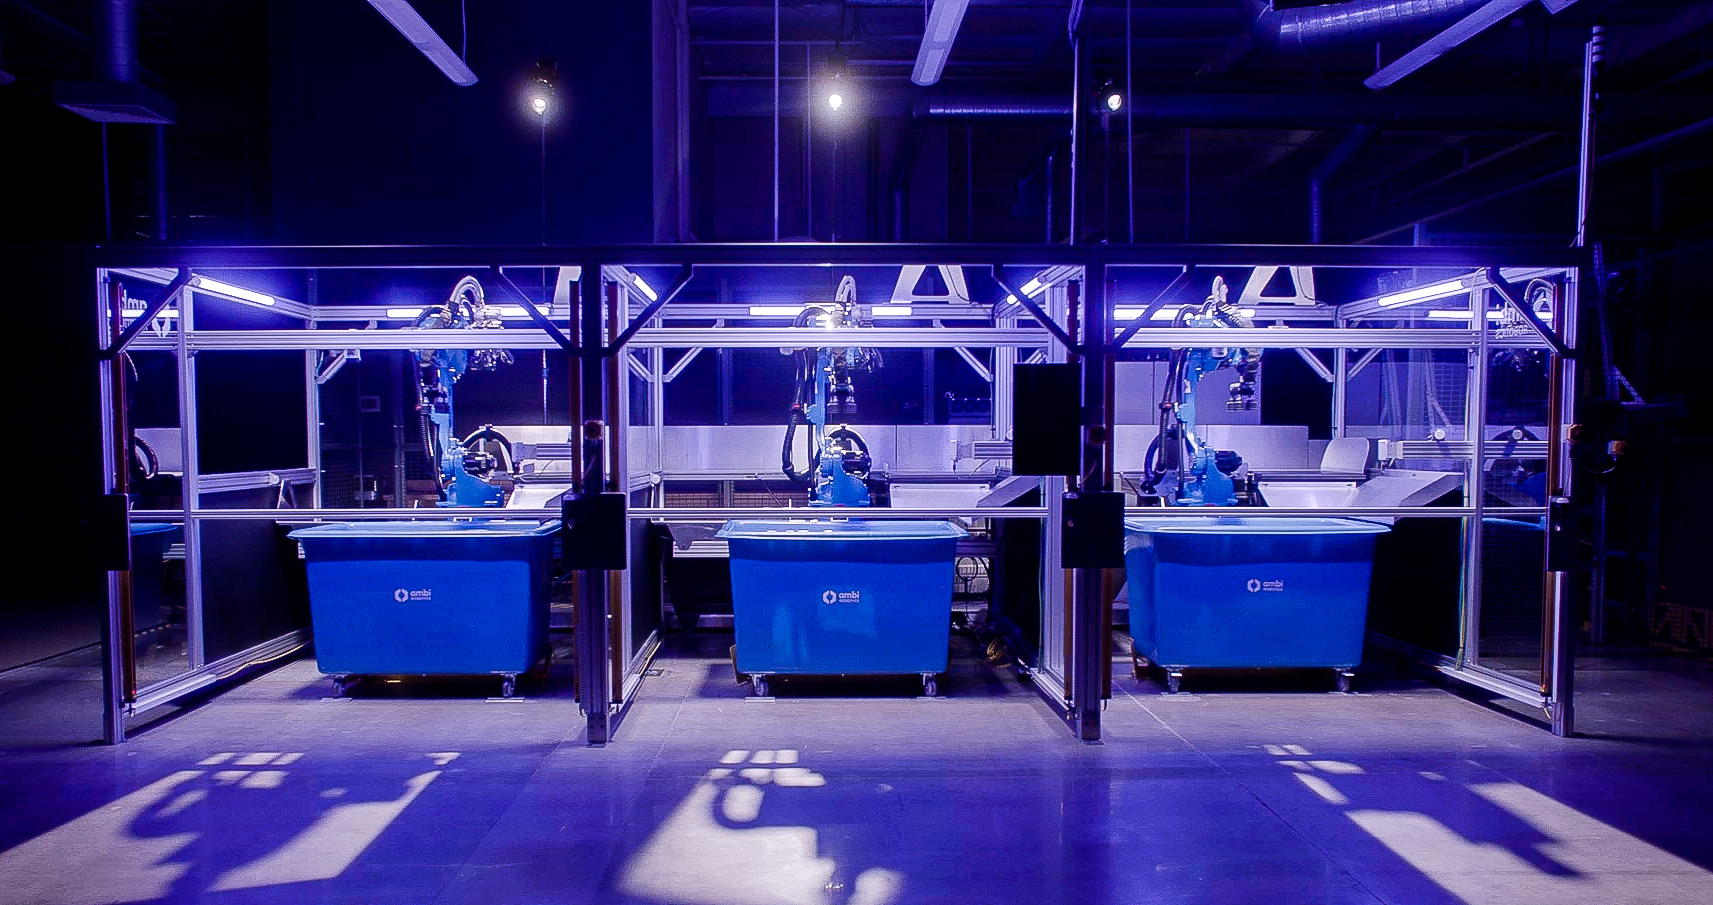 Introducing AmbiSort B-Series from Ambi Robotics - the AI-powered modular parcel induction and sorting solution that's built for more: more parcels, more speed, more flexibility and more safety.